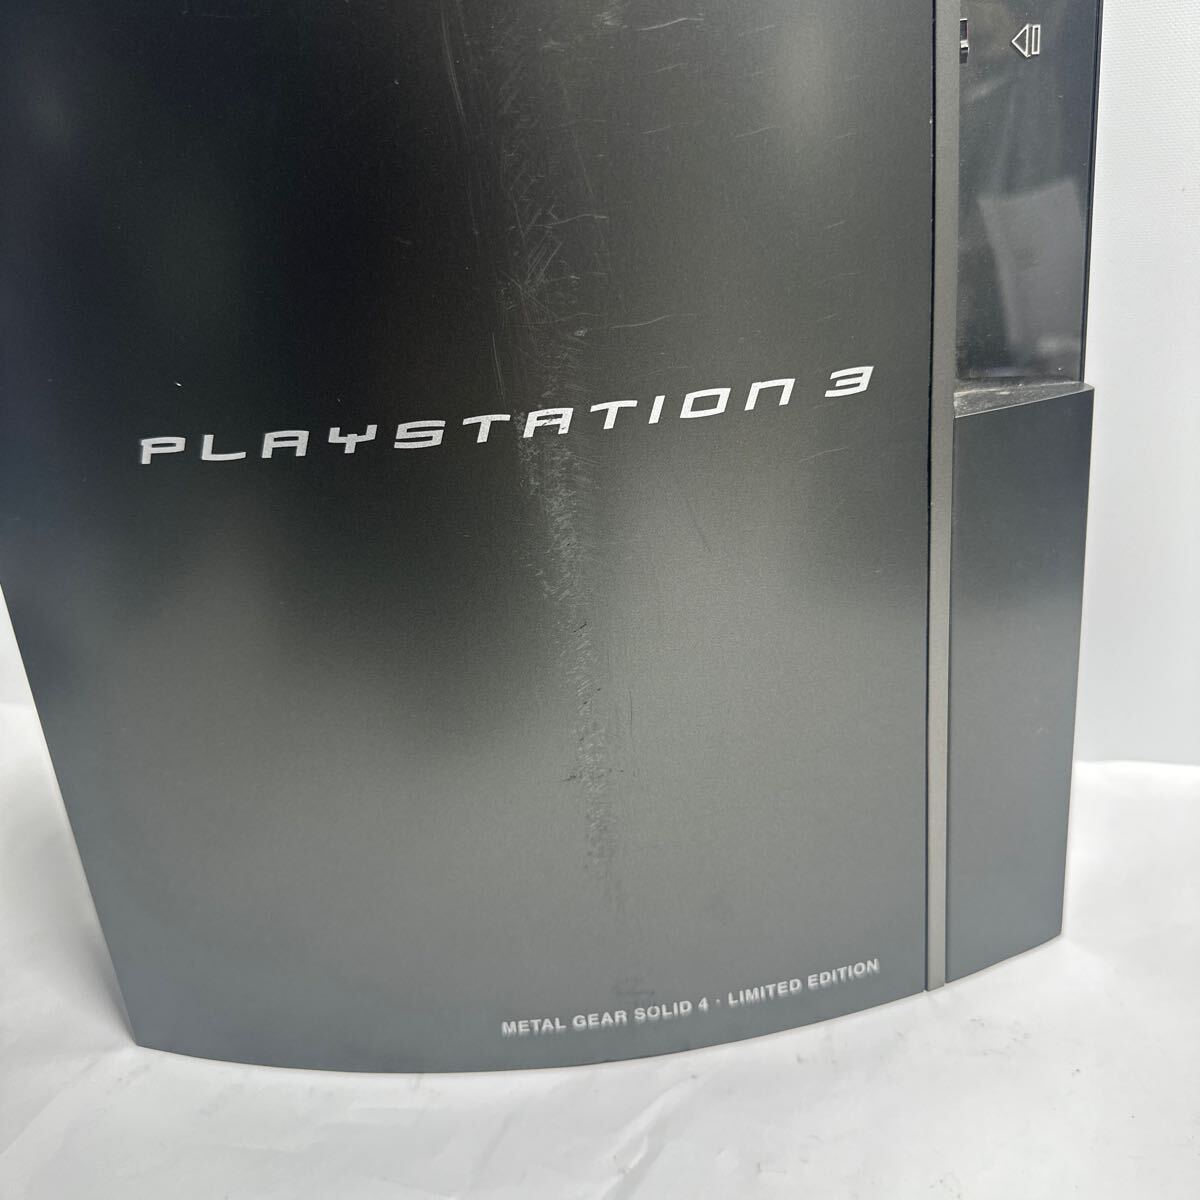 「2FT13」PS3 本体 40GB METAL GEAR SOLID 4 LIMITED EDITION CECHH00 初期化済 動作品 コントローラー無し本体のみ(240419)の画像3